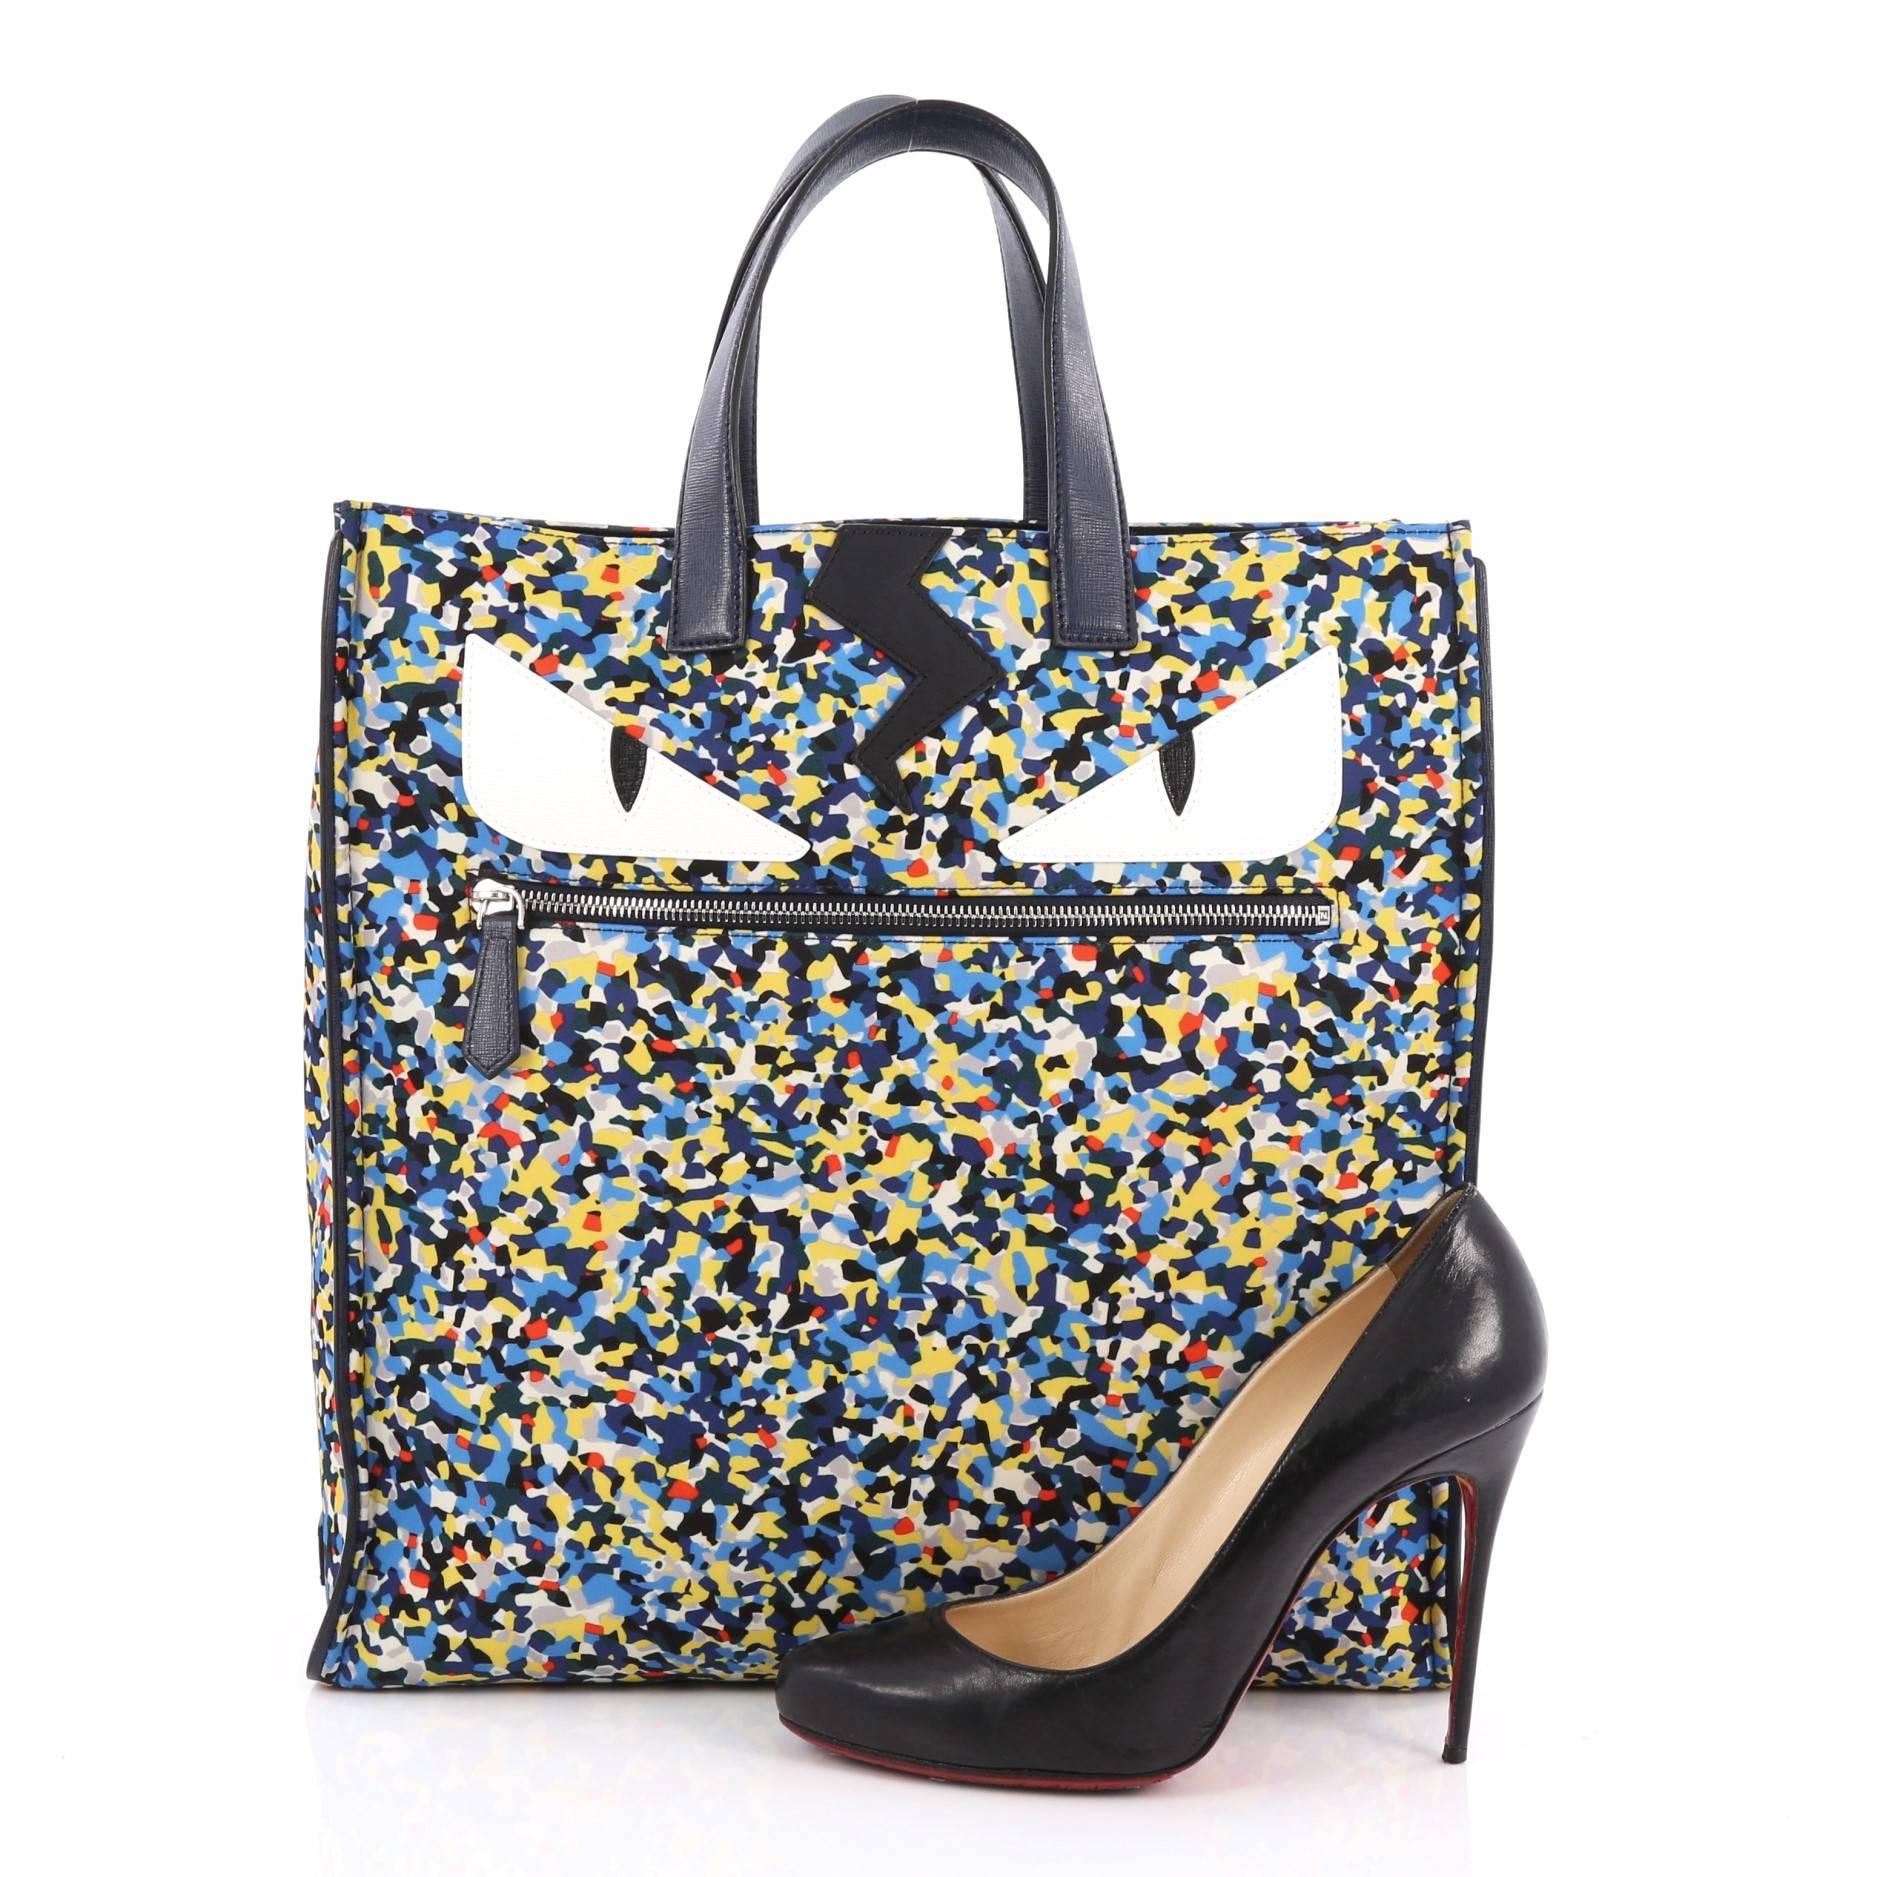 This authentic Fendi Monster Tote Printed Nylon is a stylishly bold, modern tote perfect for any on-the-go moments. Crafted from multicolor nylon with confetti print design, this easy-to-carry tote features dual flat black leather handles,